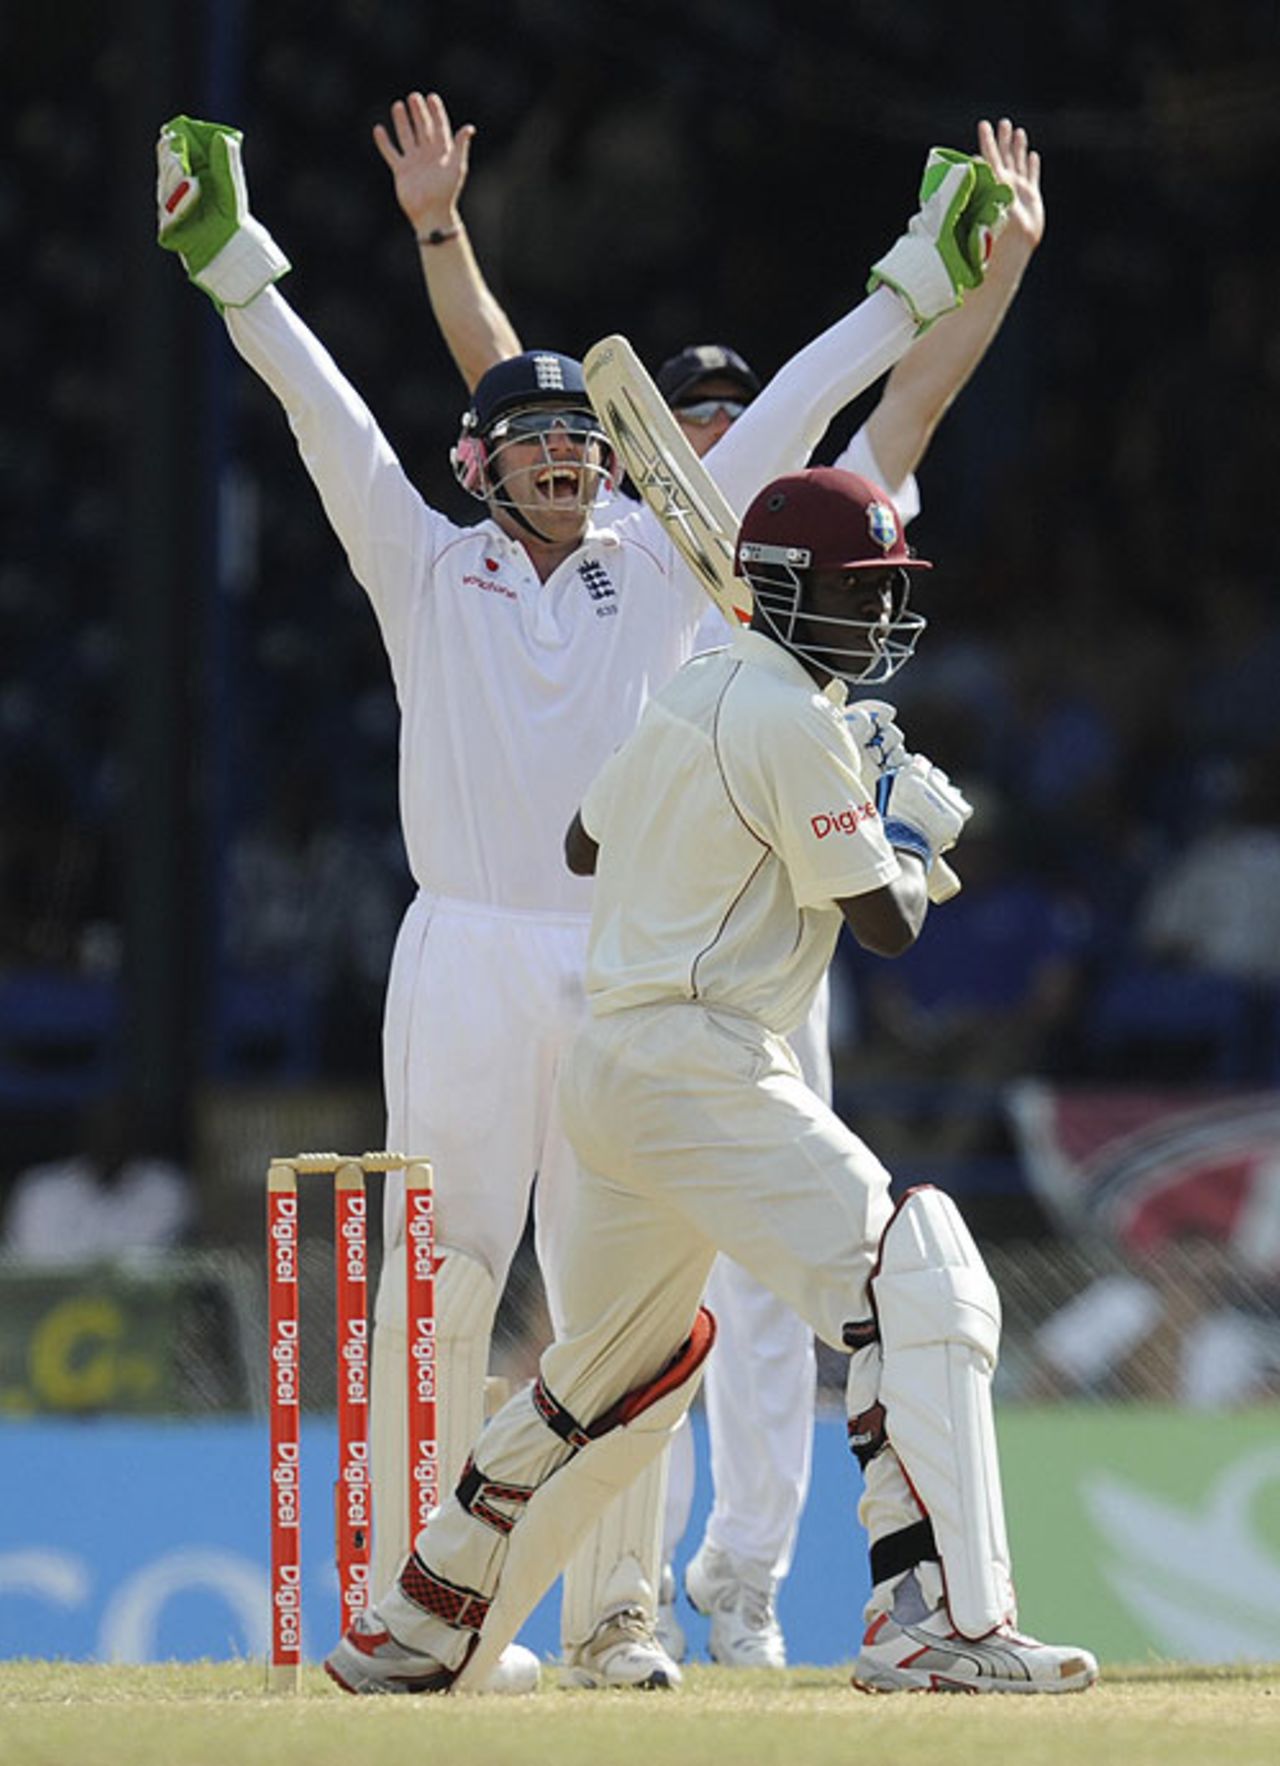 Lionel Baker pads up to Graeme Swann as West Indies' innings comes to an end, West Indies v England, 5th Test, Trinidad, March 9, 2009